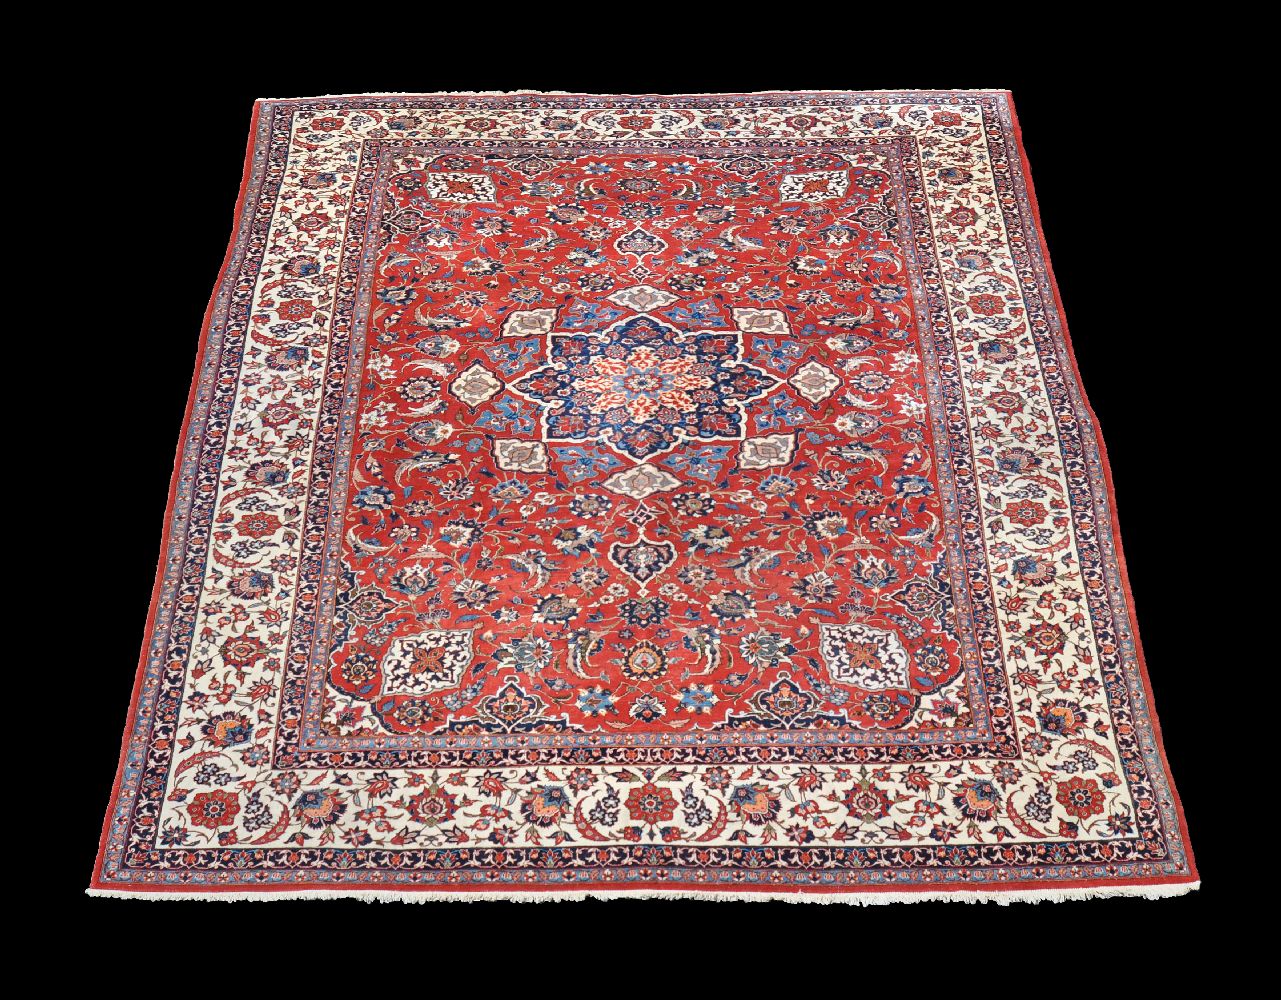 An Isfahan carpet, approximately 420 x 271cm